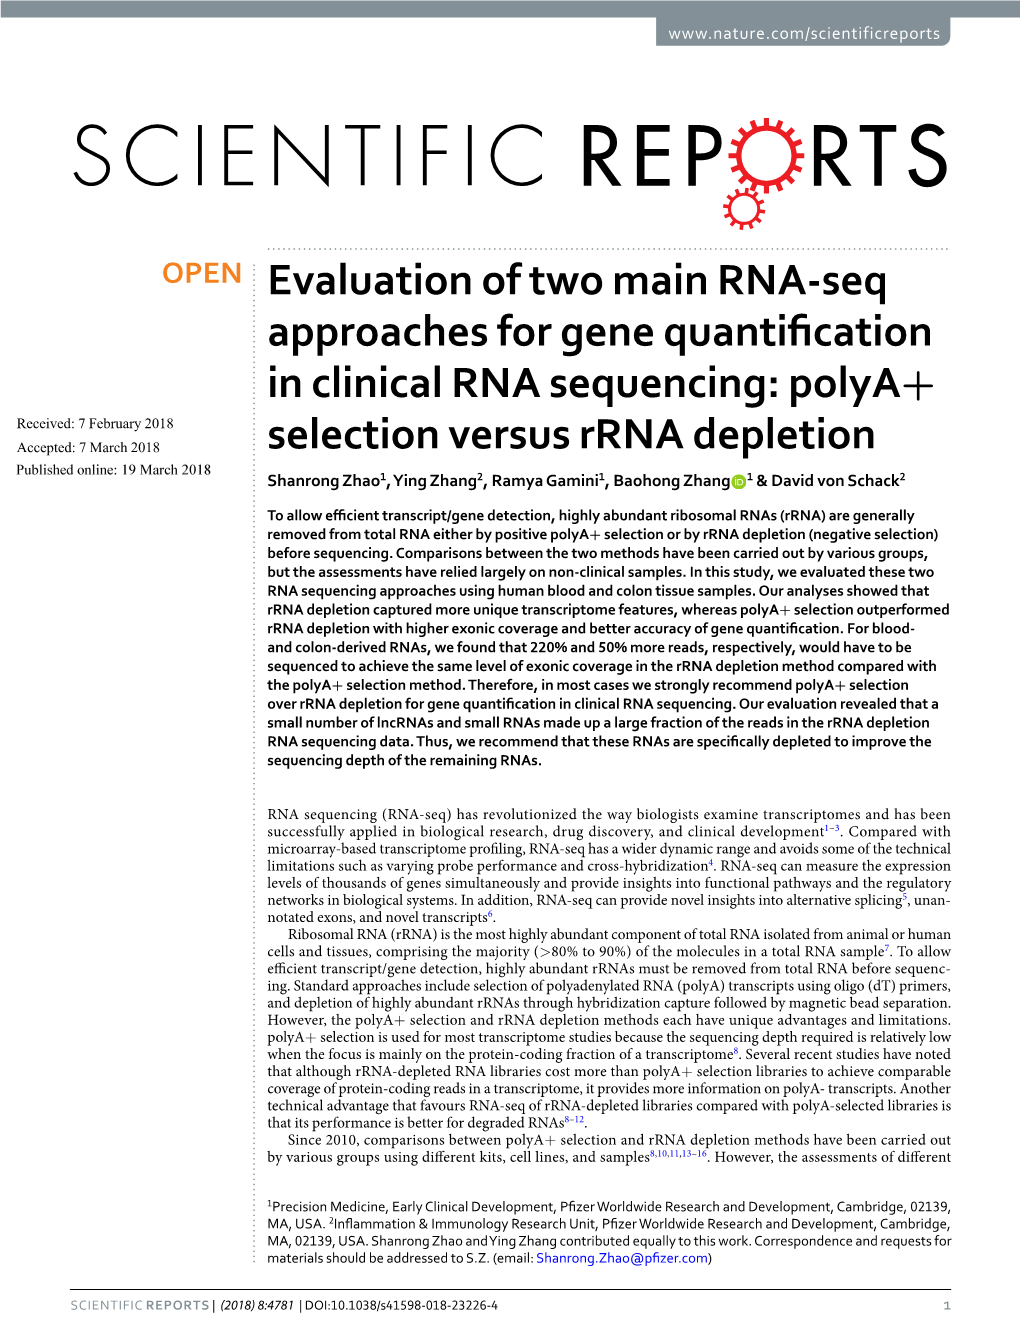 Evaluation of Two Main RNA-Seq Approaches for Gene Quantification